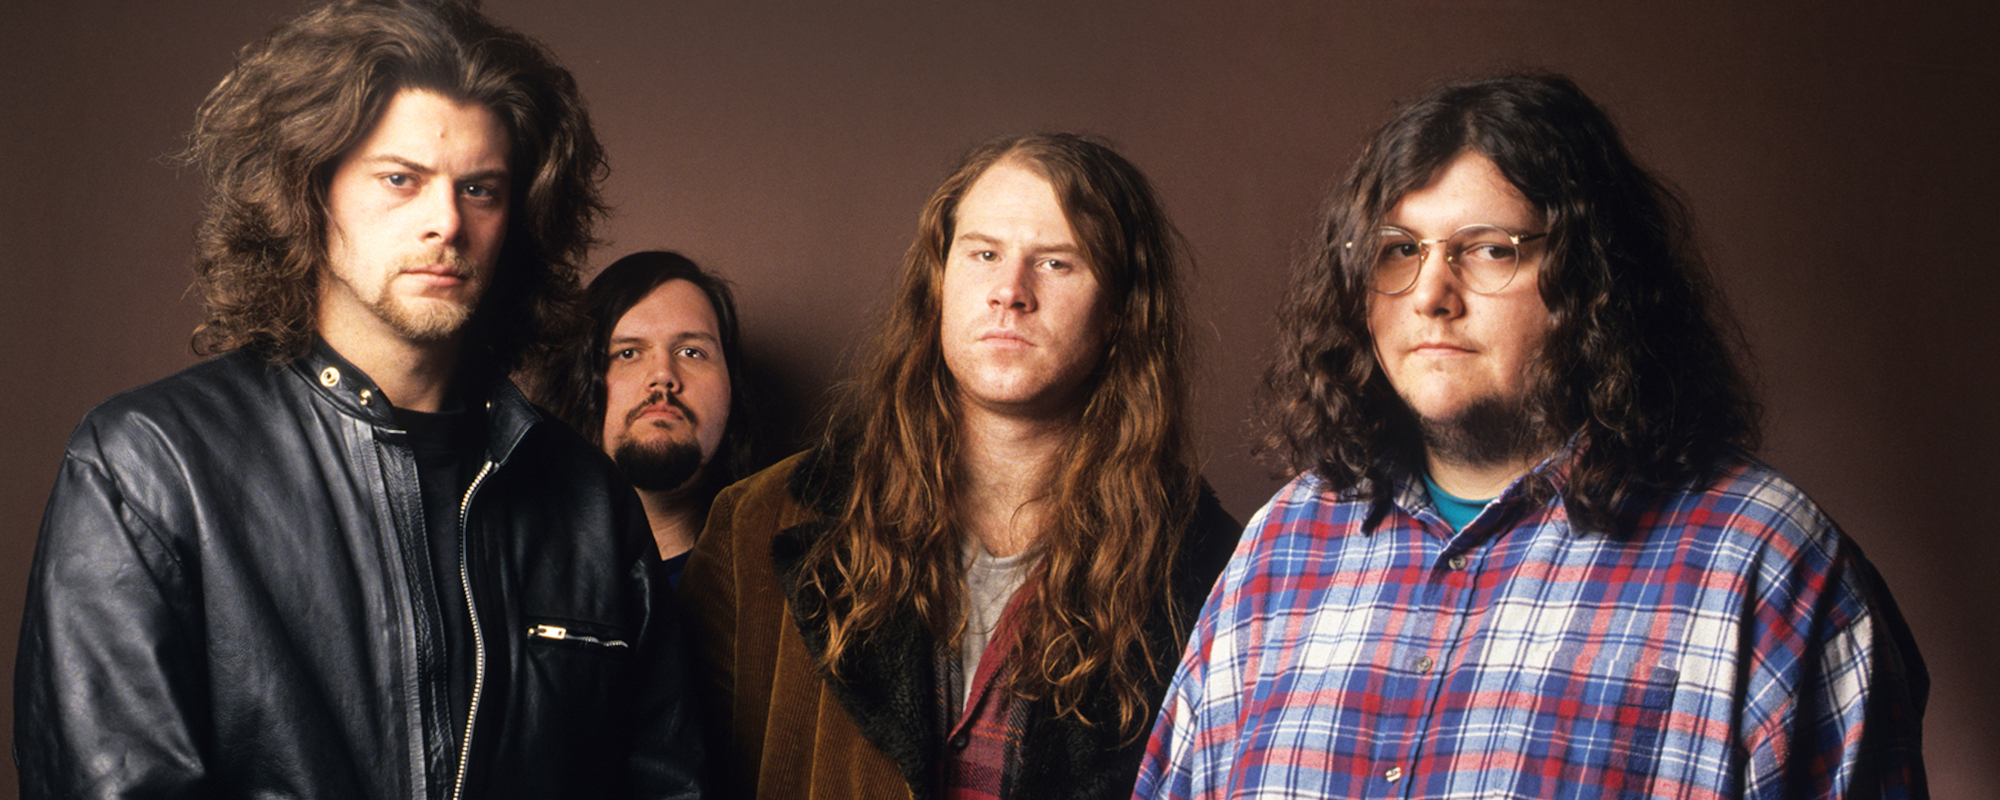 The Screaming Trees